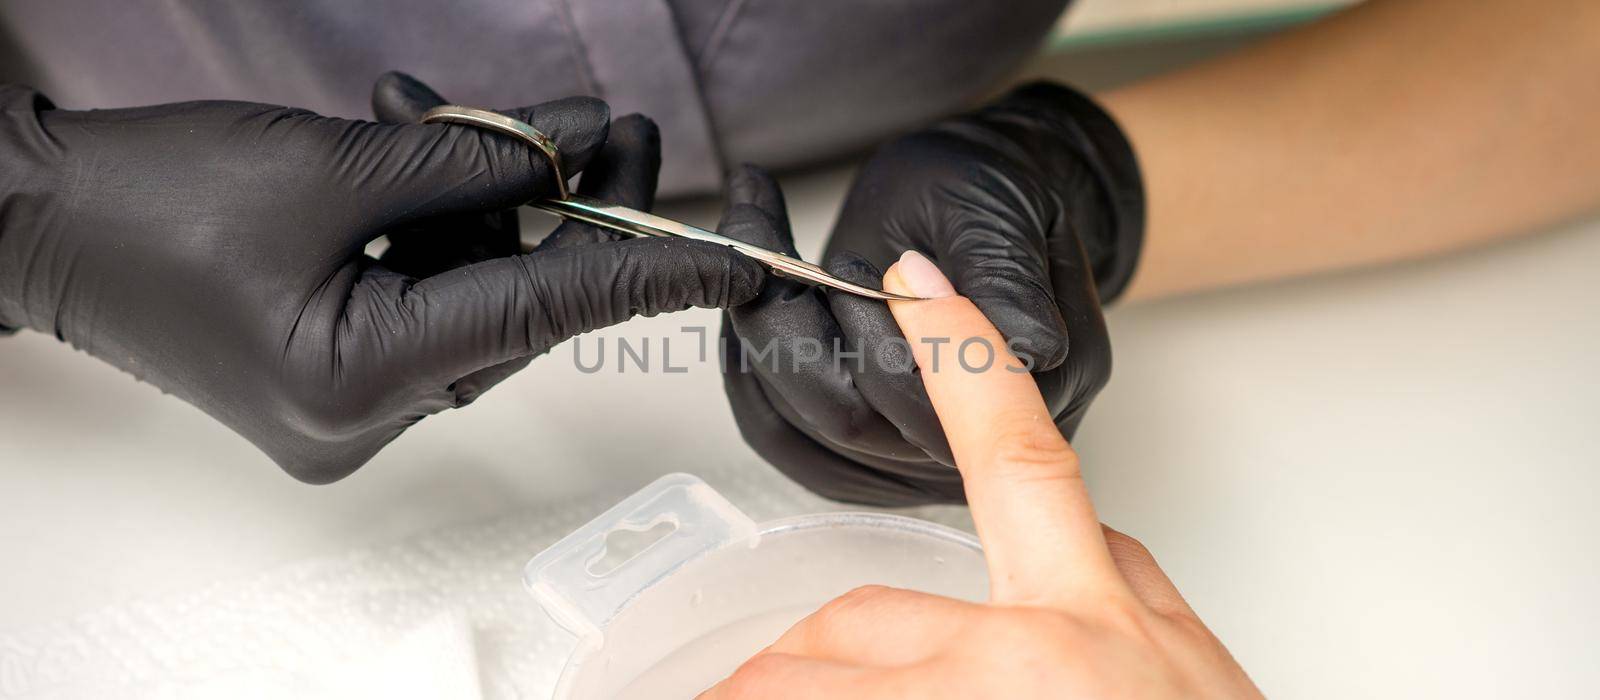 Manicure master removes cuticles from female nails with scissors wearing protective gloves in manicure salon